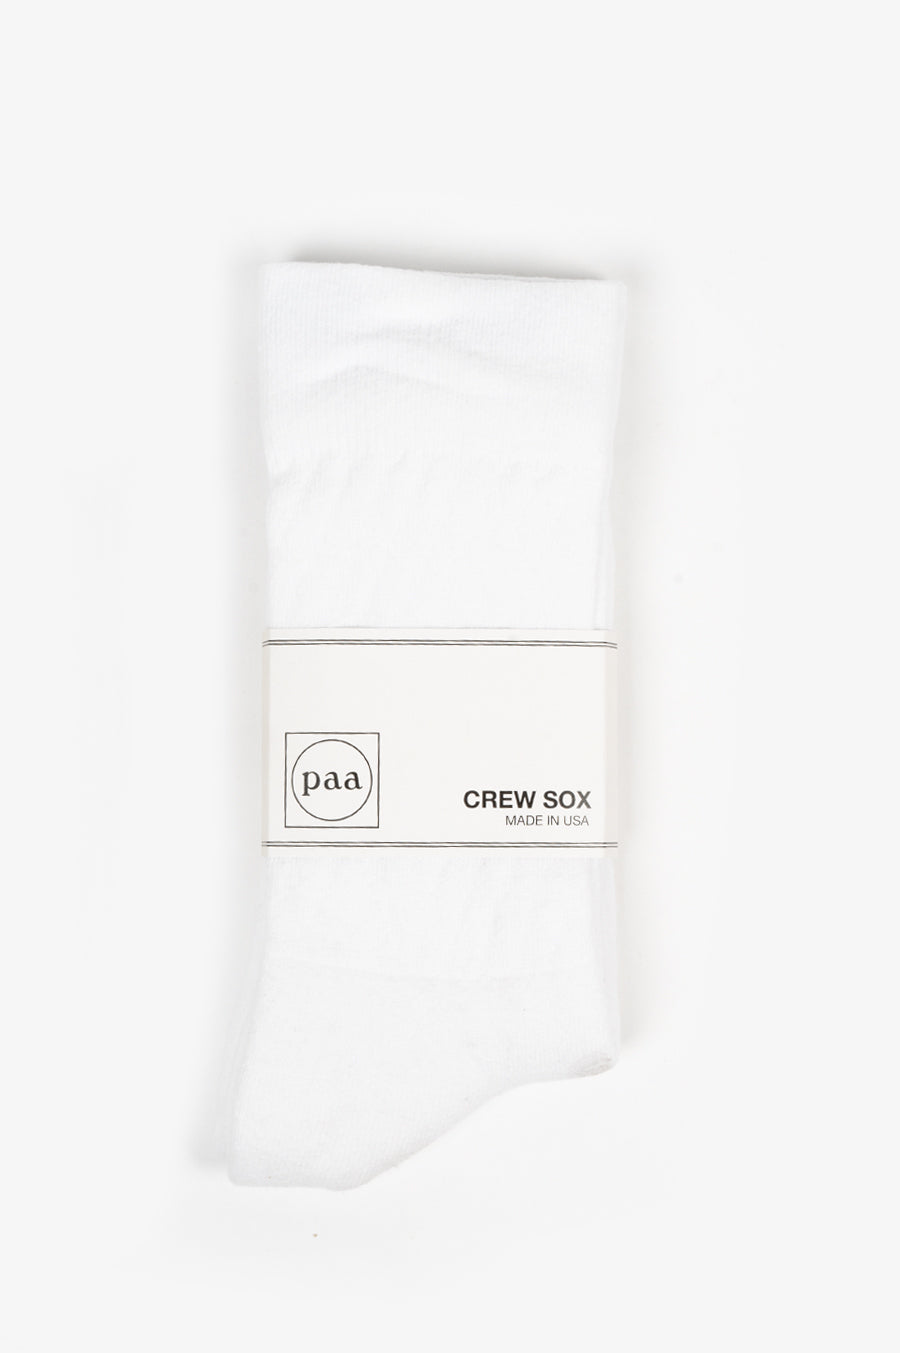 HOUSE OF PAA CREW SOX 2.5 WHITE